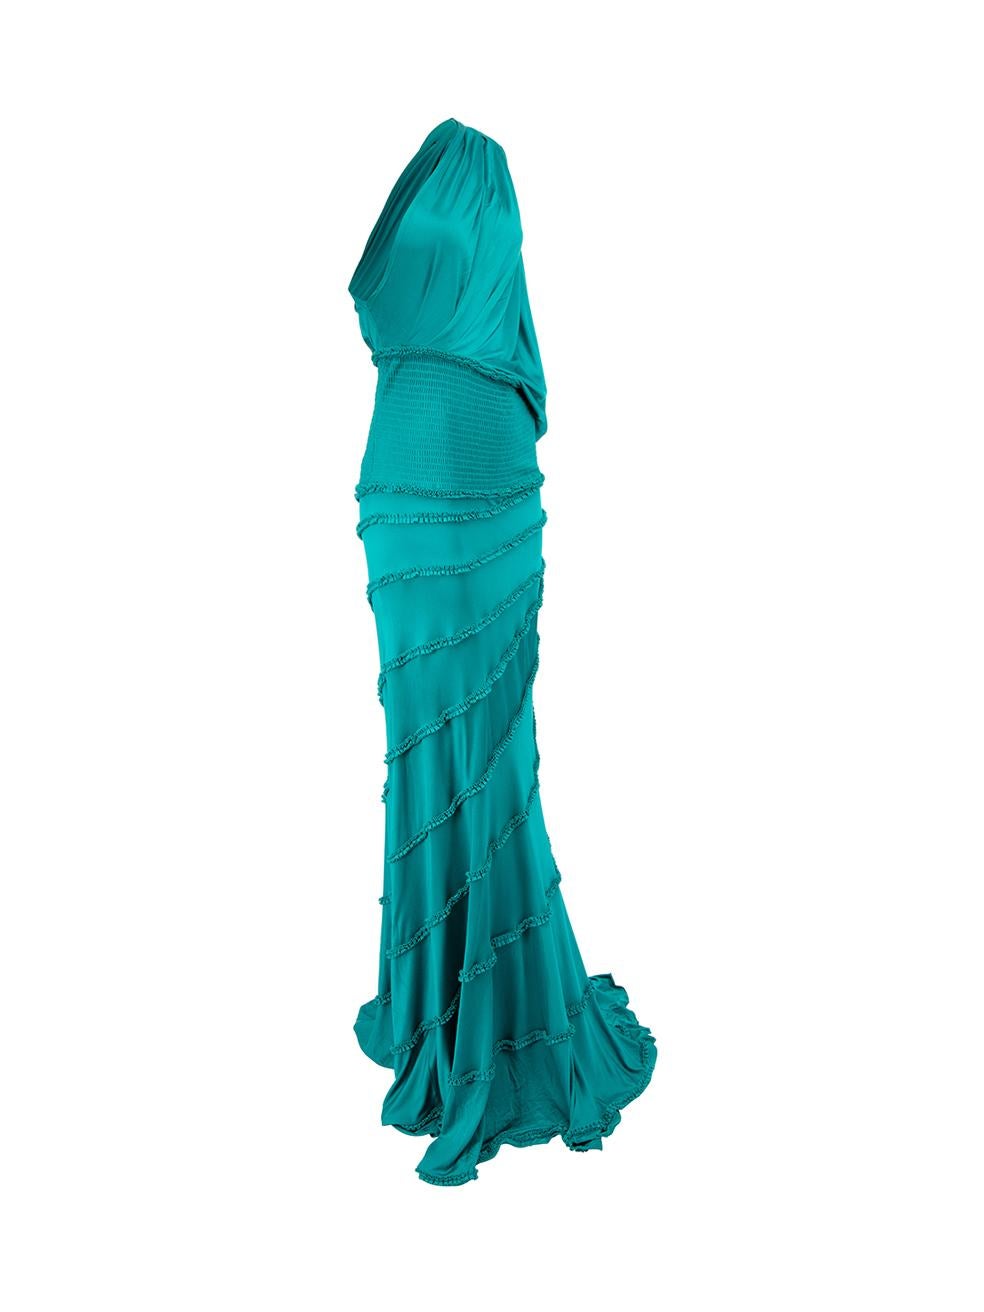 CONDITION is Very good. Minimal wear to dress is evident. Minor pulls and small discoloured marks to front of this used Catherine Malandrino designer resale item. 



Details


Turquoise

Silk

Maxi dress

Stretchy

One shoulder

Shirred elasticated